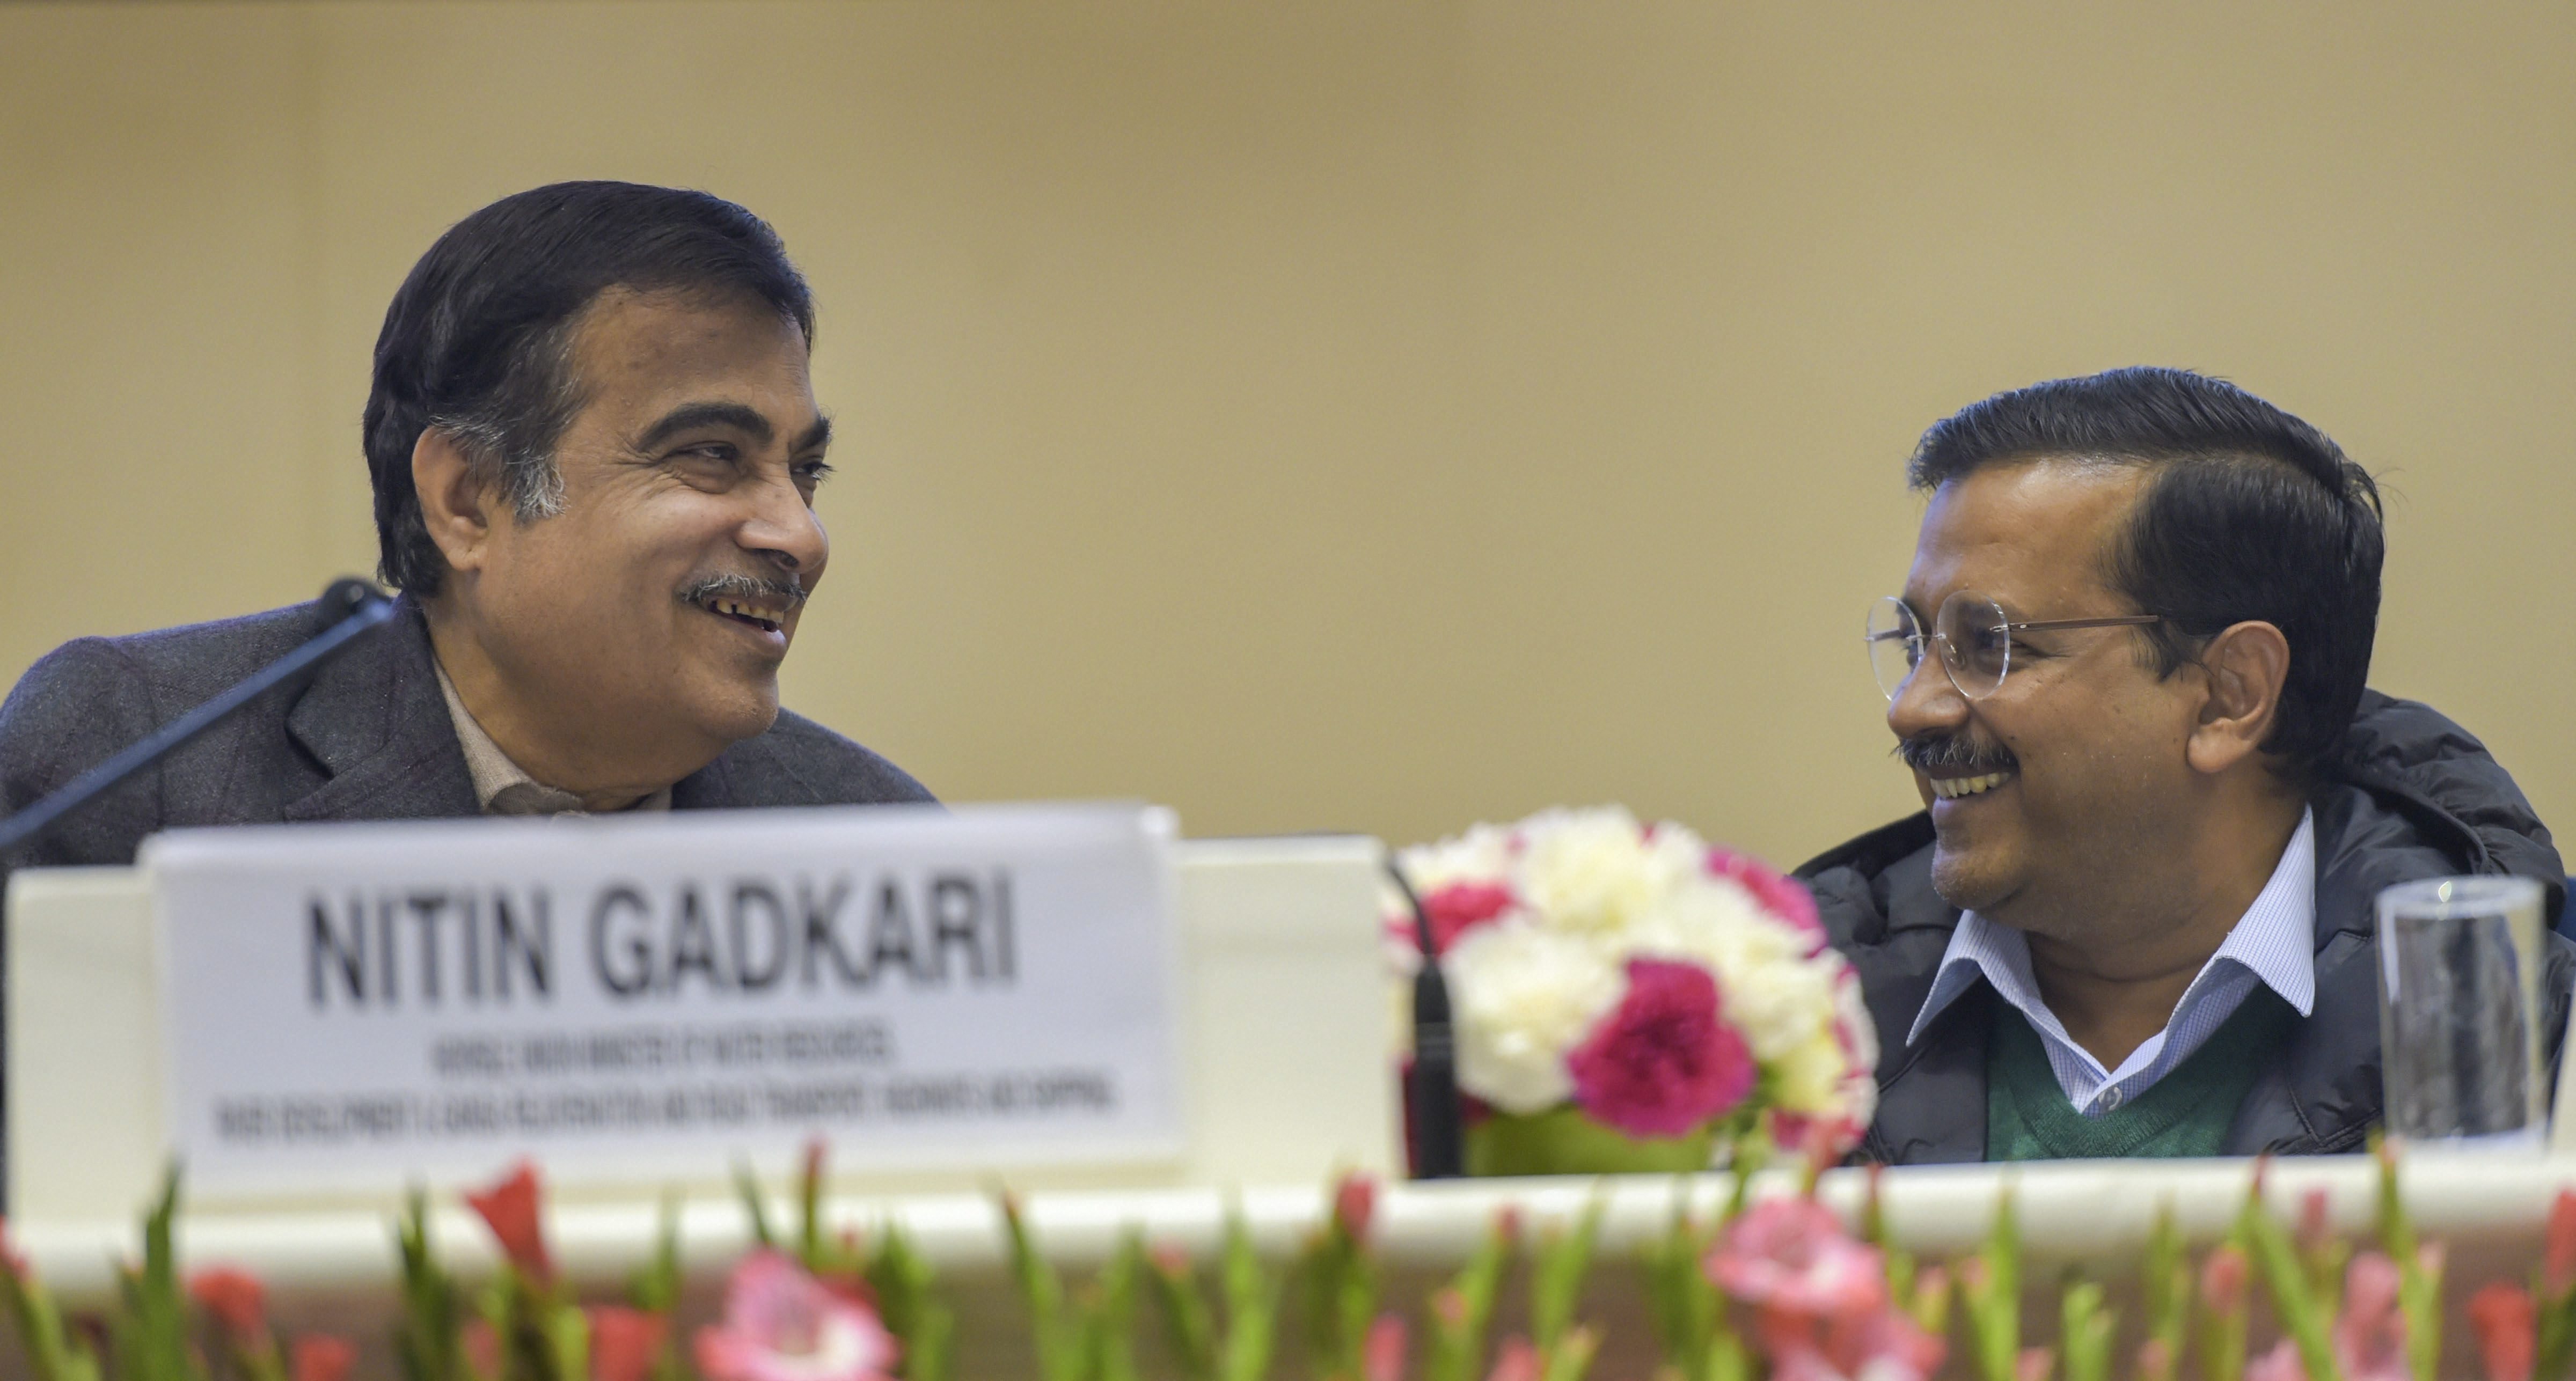 Union Minister for Water Resources Nitin Gadkari with Delhi Chief Minister Arvind Kejriwal during the foundation-laying ceremony of projects for Yamuna Rejuvenation and Namami Gange, in New Delhi - PTI